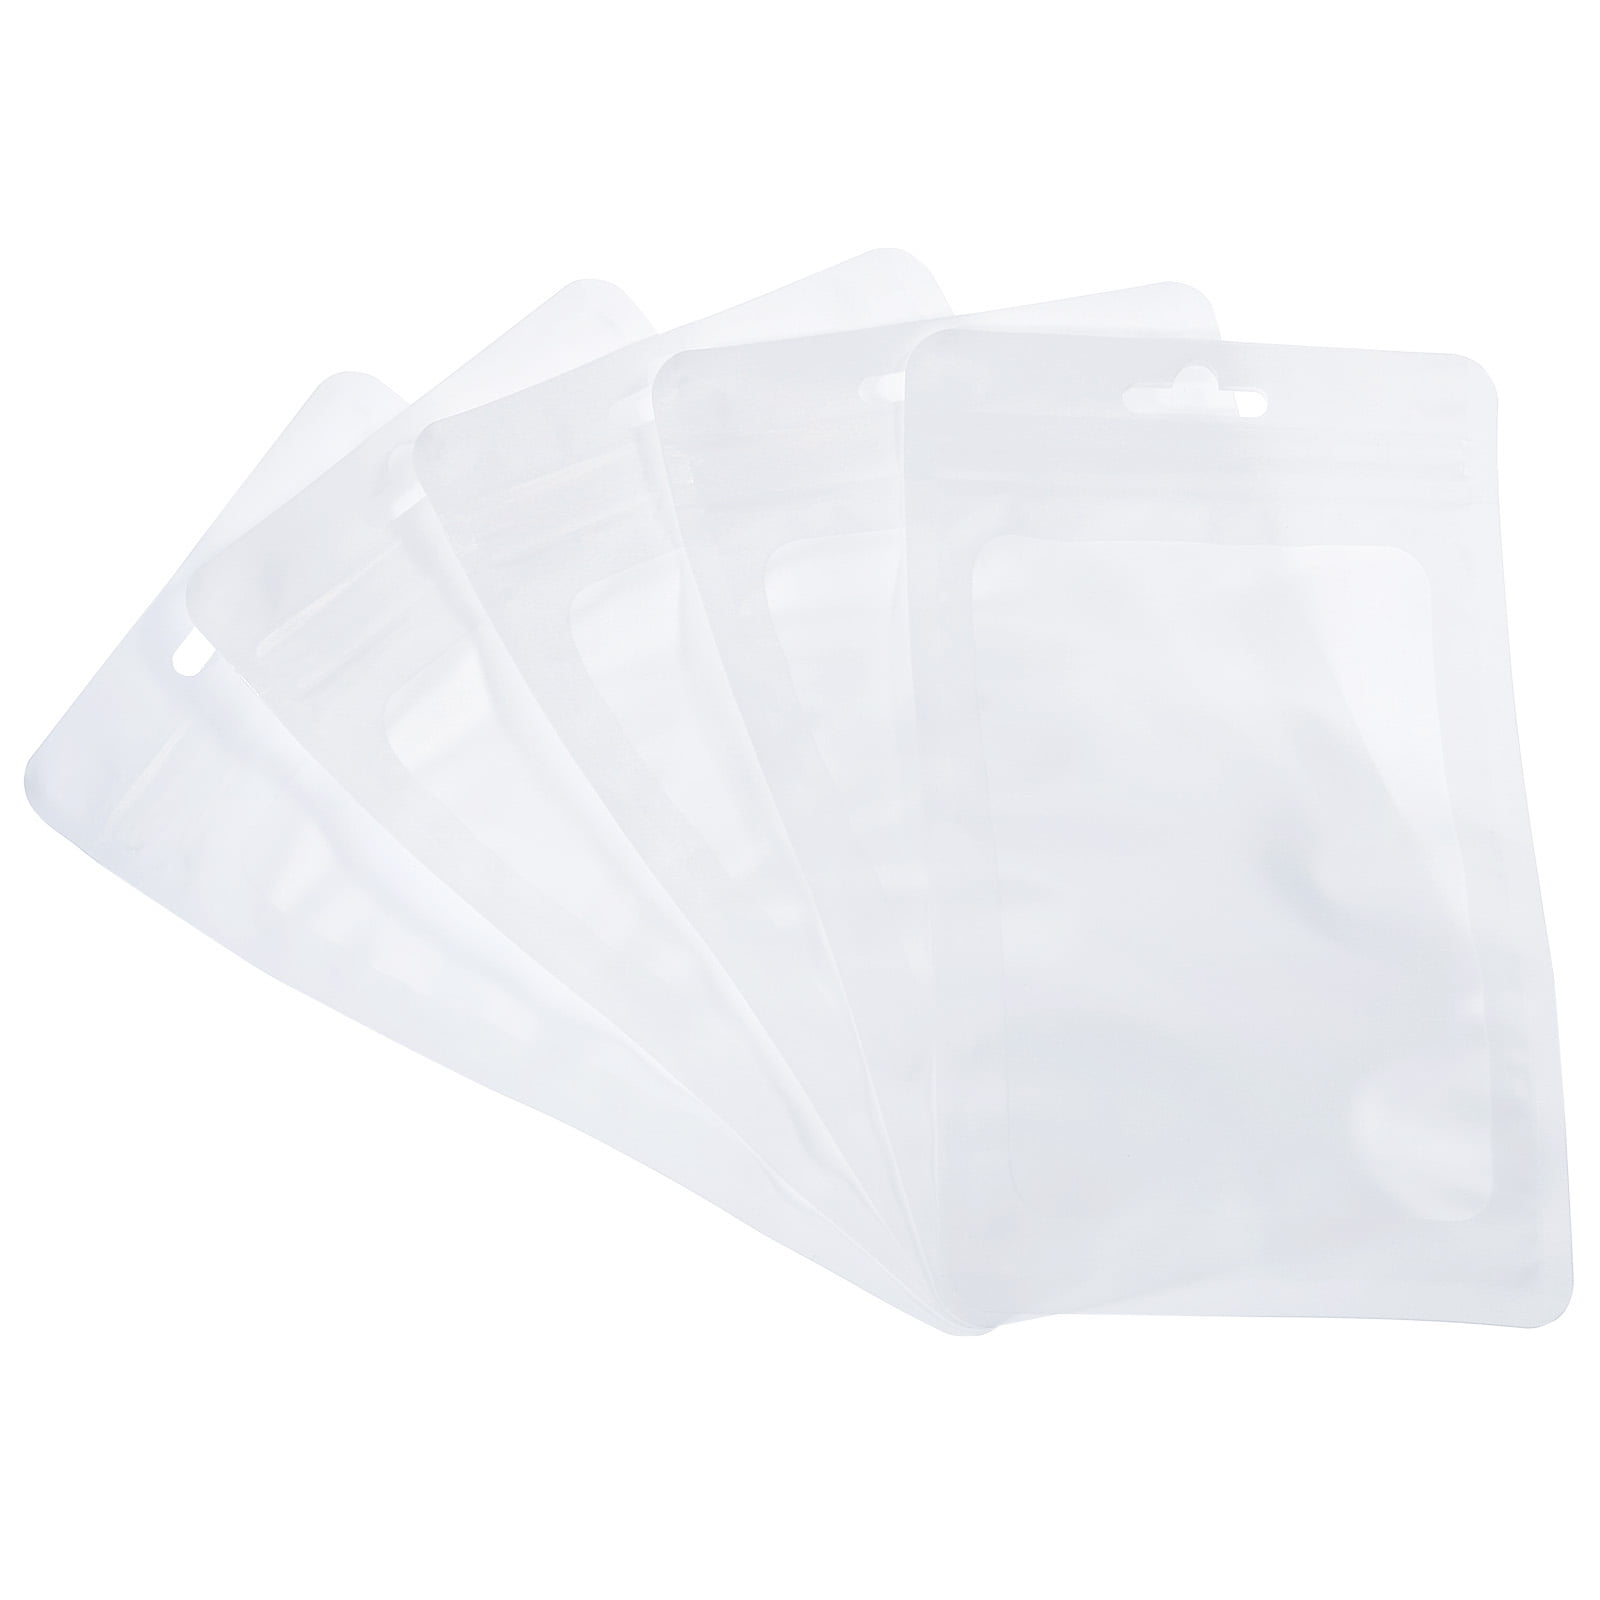 100 Small Clear Bags Plastic Baggies Baggy Grip Self Seal Resealable 